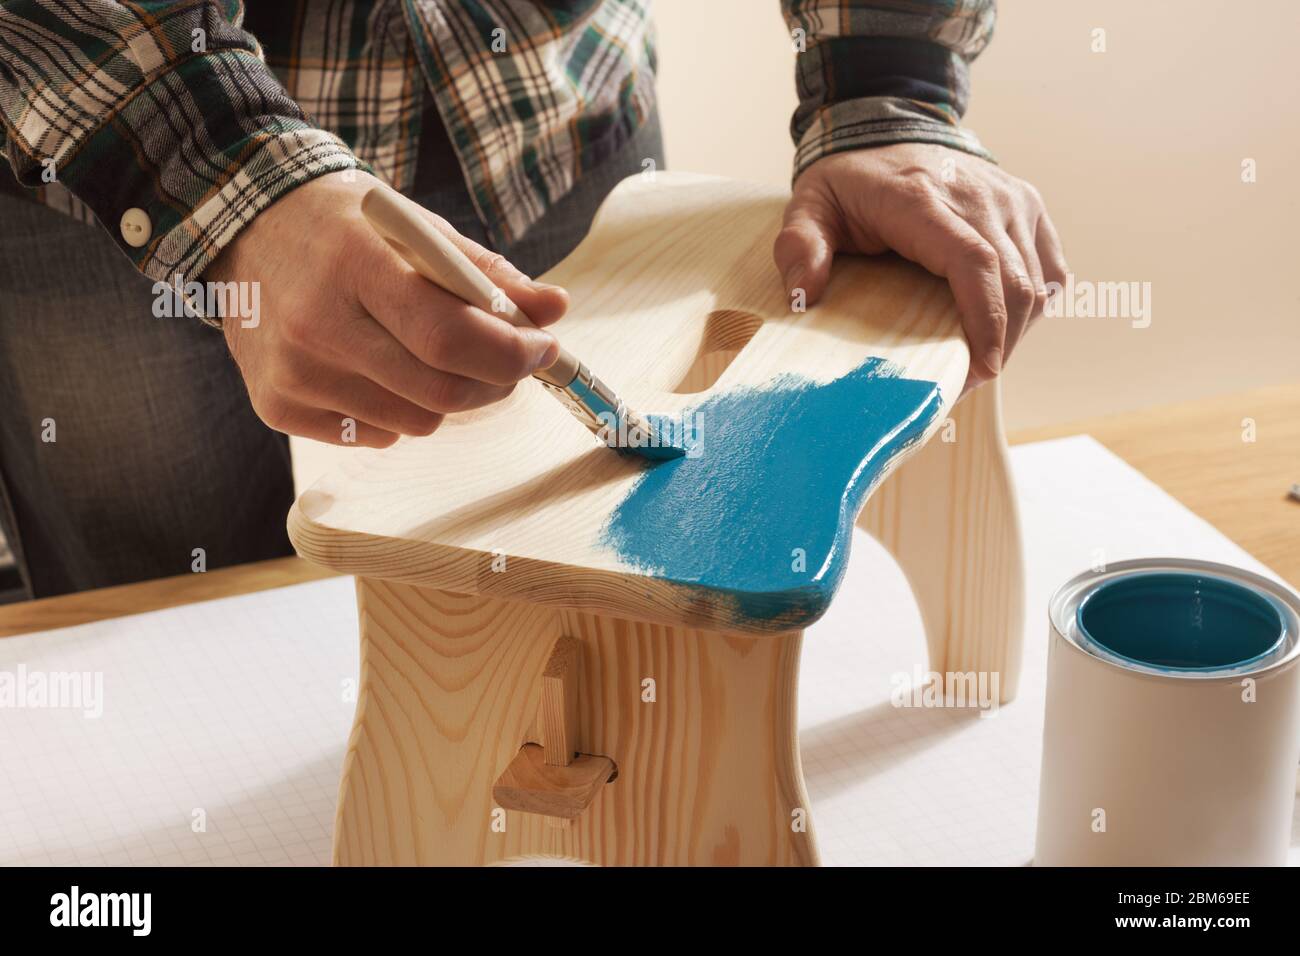 Craftsman varnishing a wooden handmade stool at home with a blue coating on a work table, hands close up Stock Photo